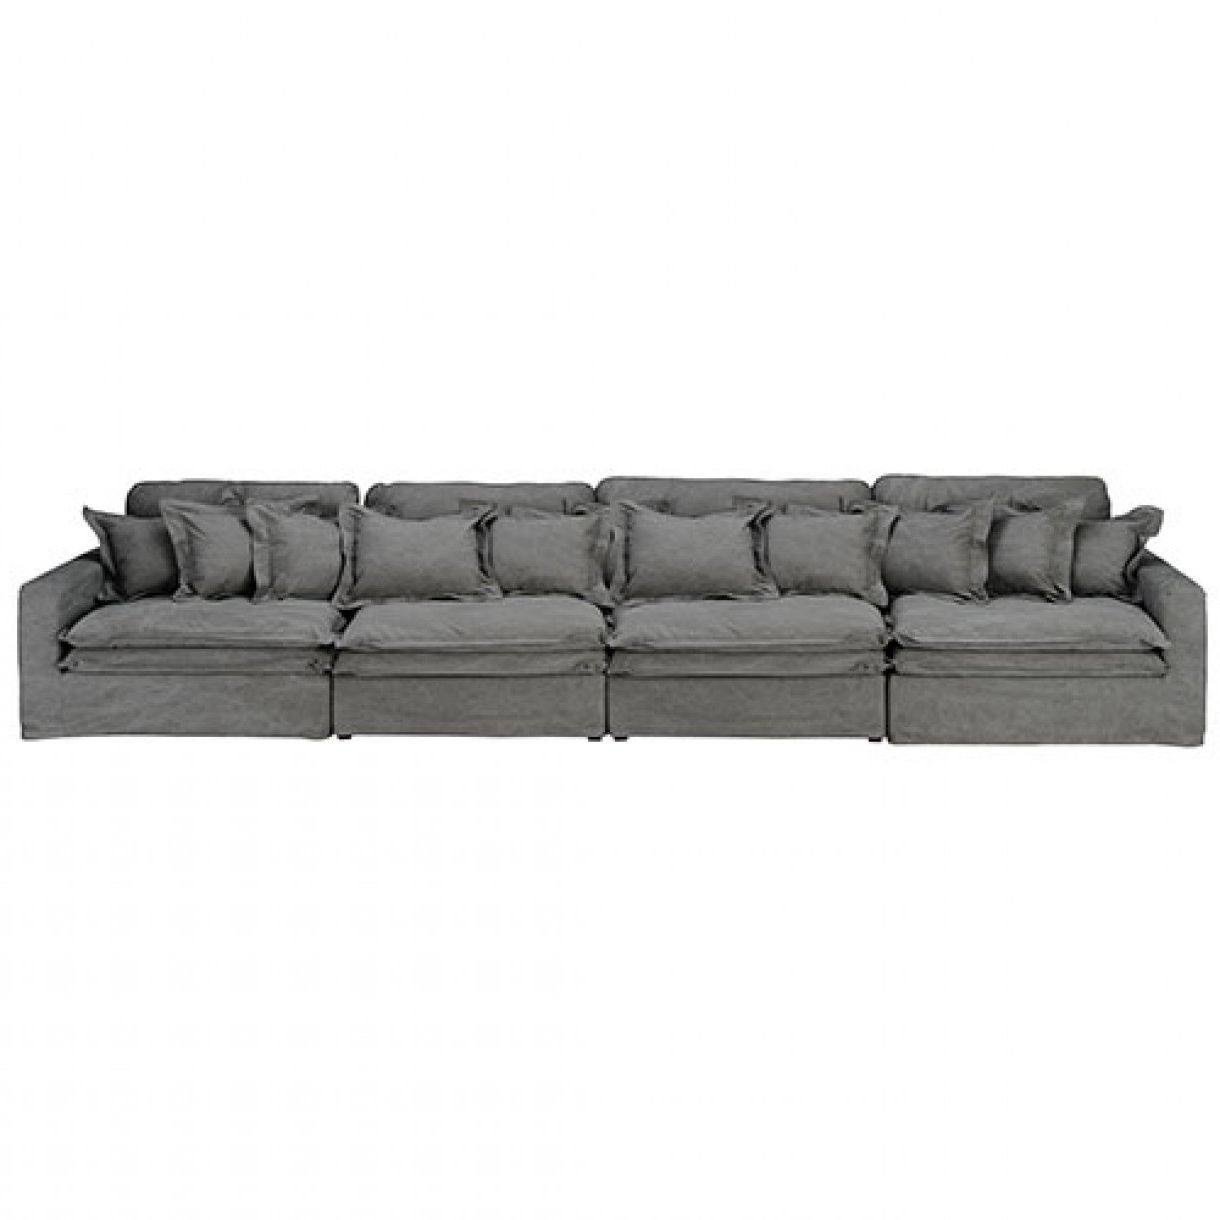 Most Recently Released Four Seater Sofas Within 4 Seater Sofa Vintage Grey Cotton (View 13 of 15)